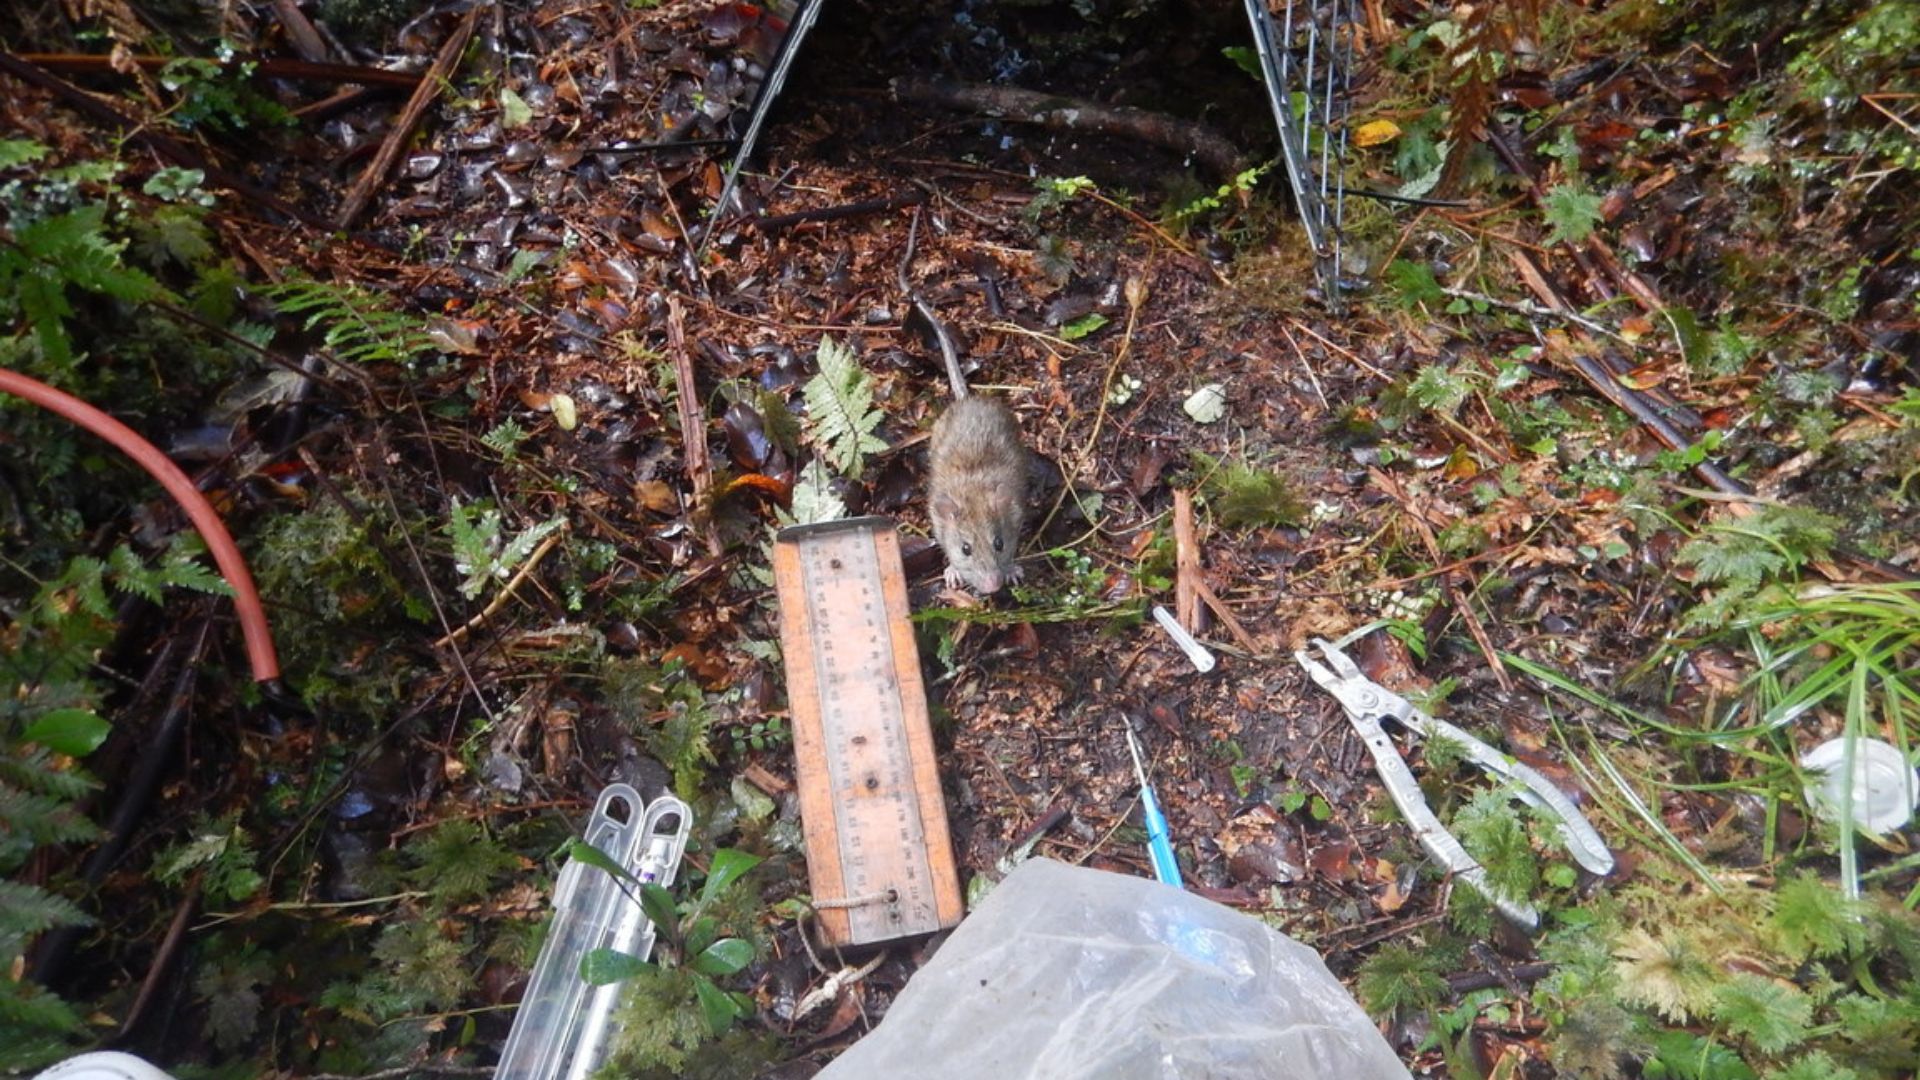 A rat in Fiordland surrounded by measuring tools.